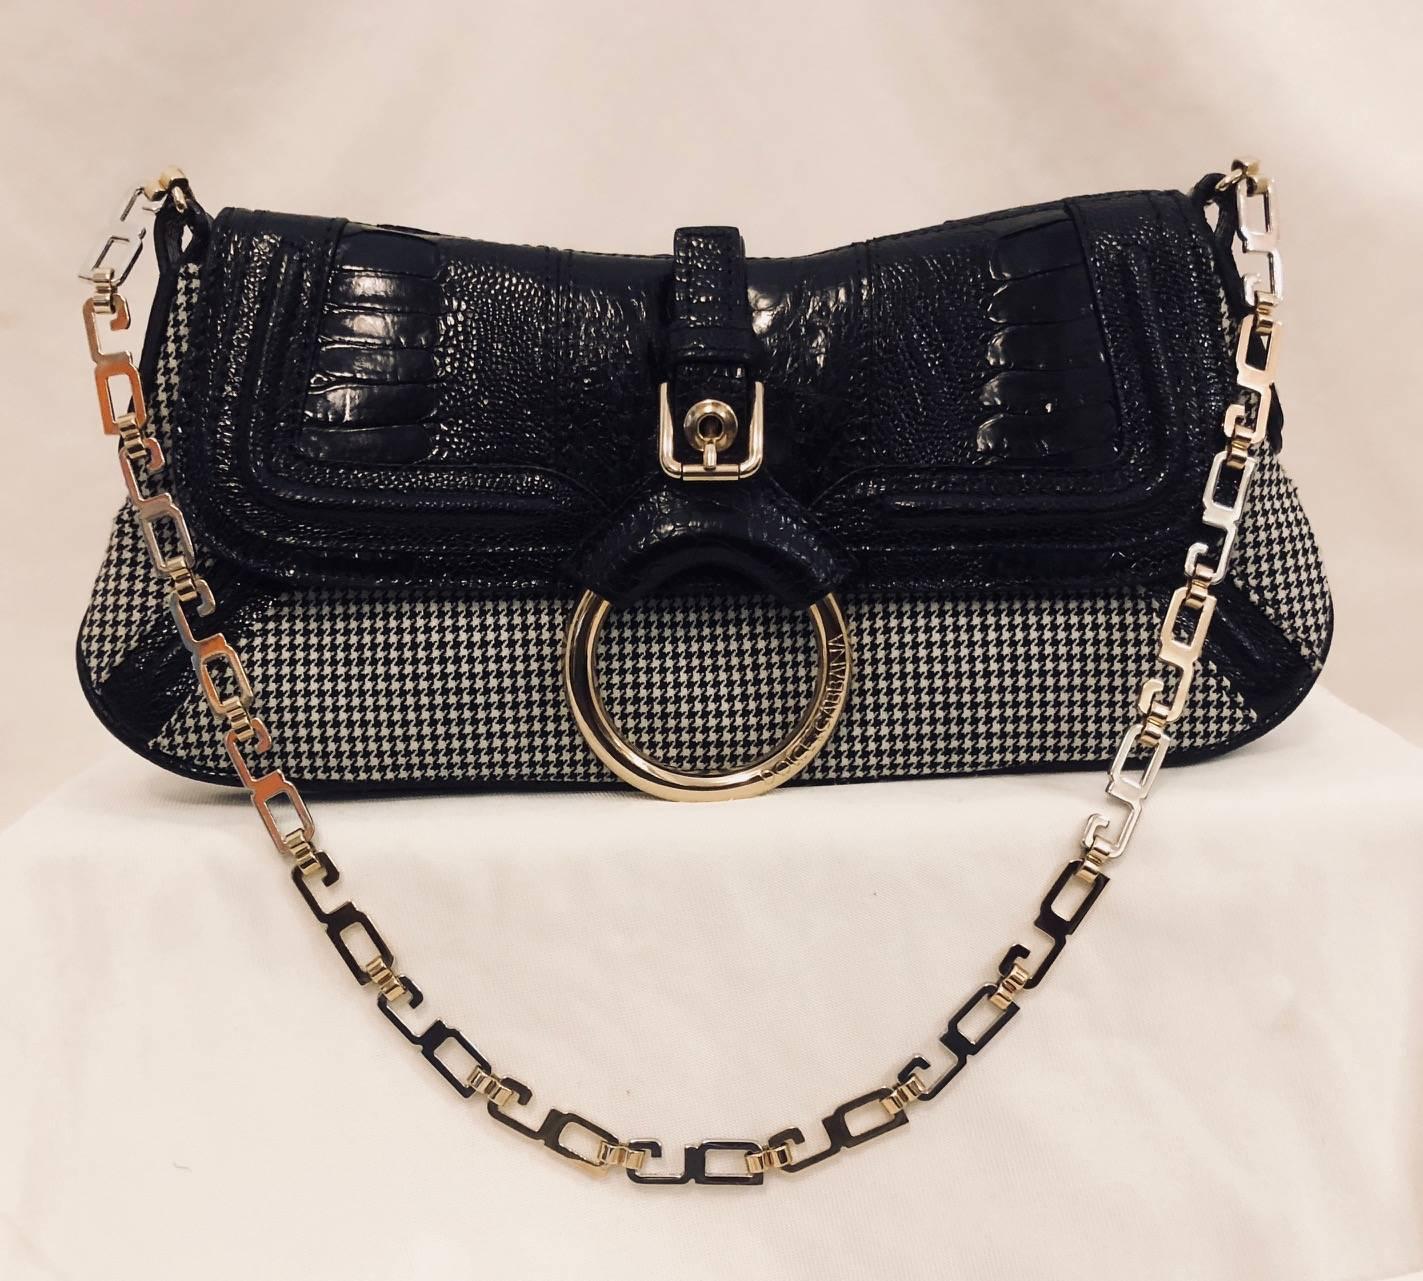 Dolce & Gabbana Black and White Houdstooth Wool Bag is fit for a lady.  Exalted Italian craftsmanship abounds with combination of fabric and exotic skin.  Structured shoulder bag features two-tone “DG” Chain Strap, gusseted body, and black lizard